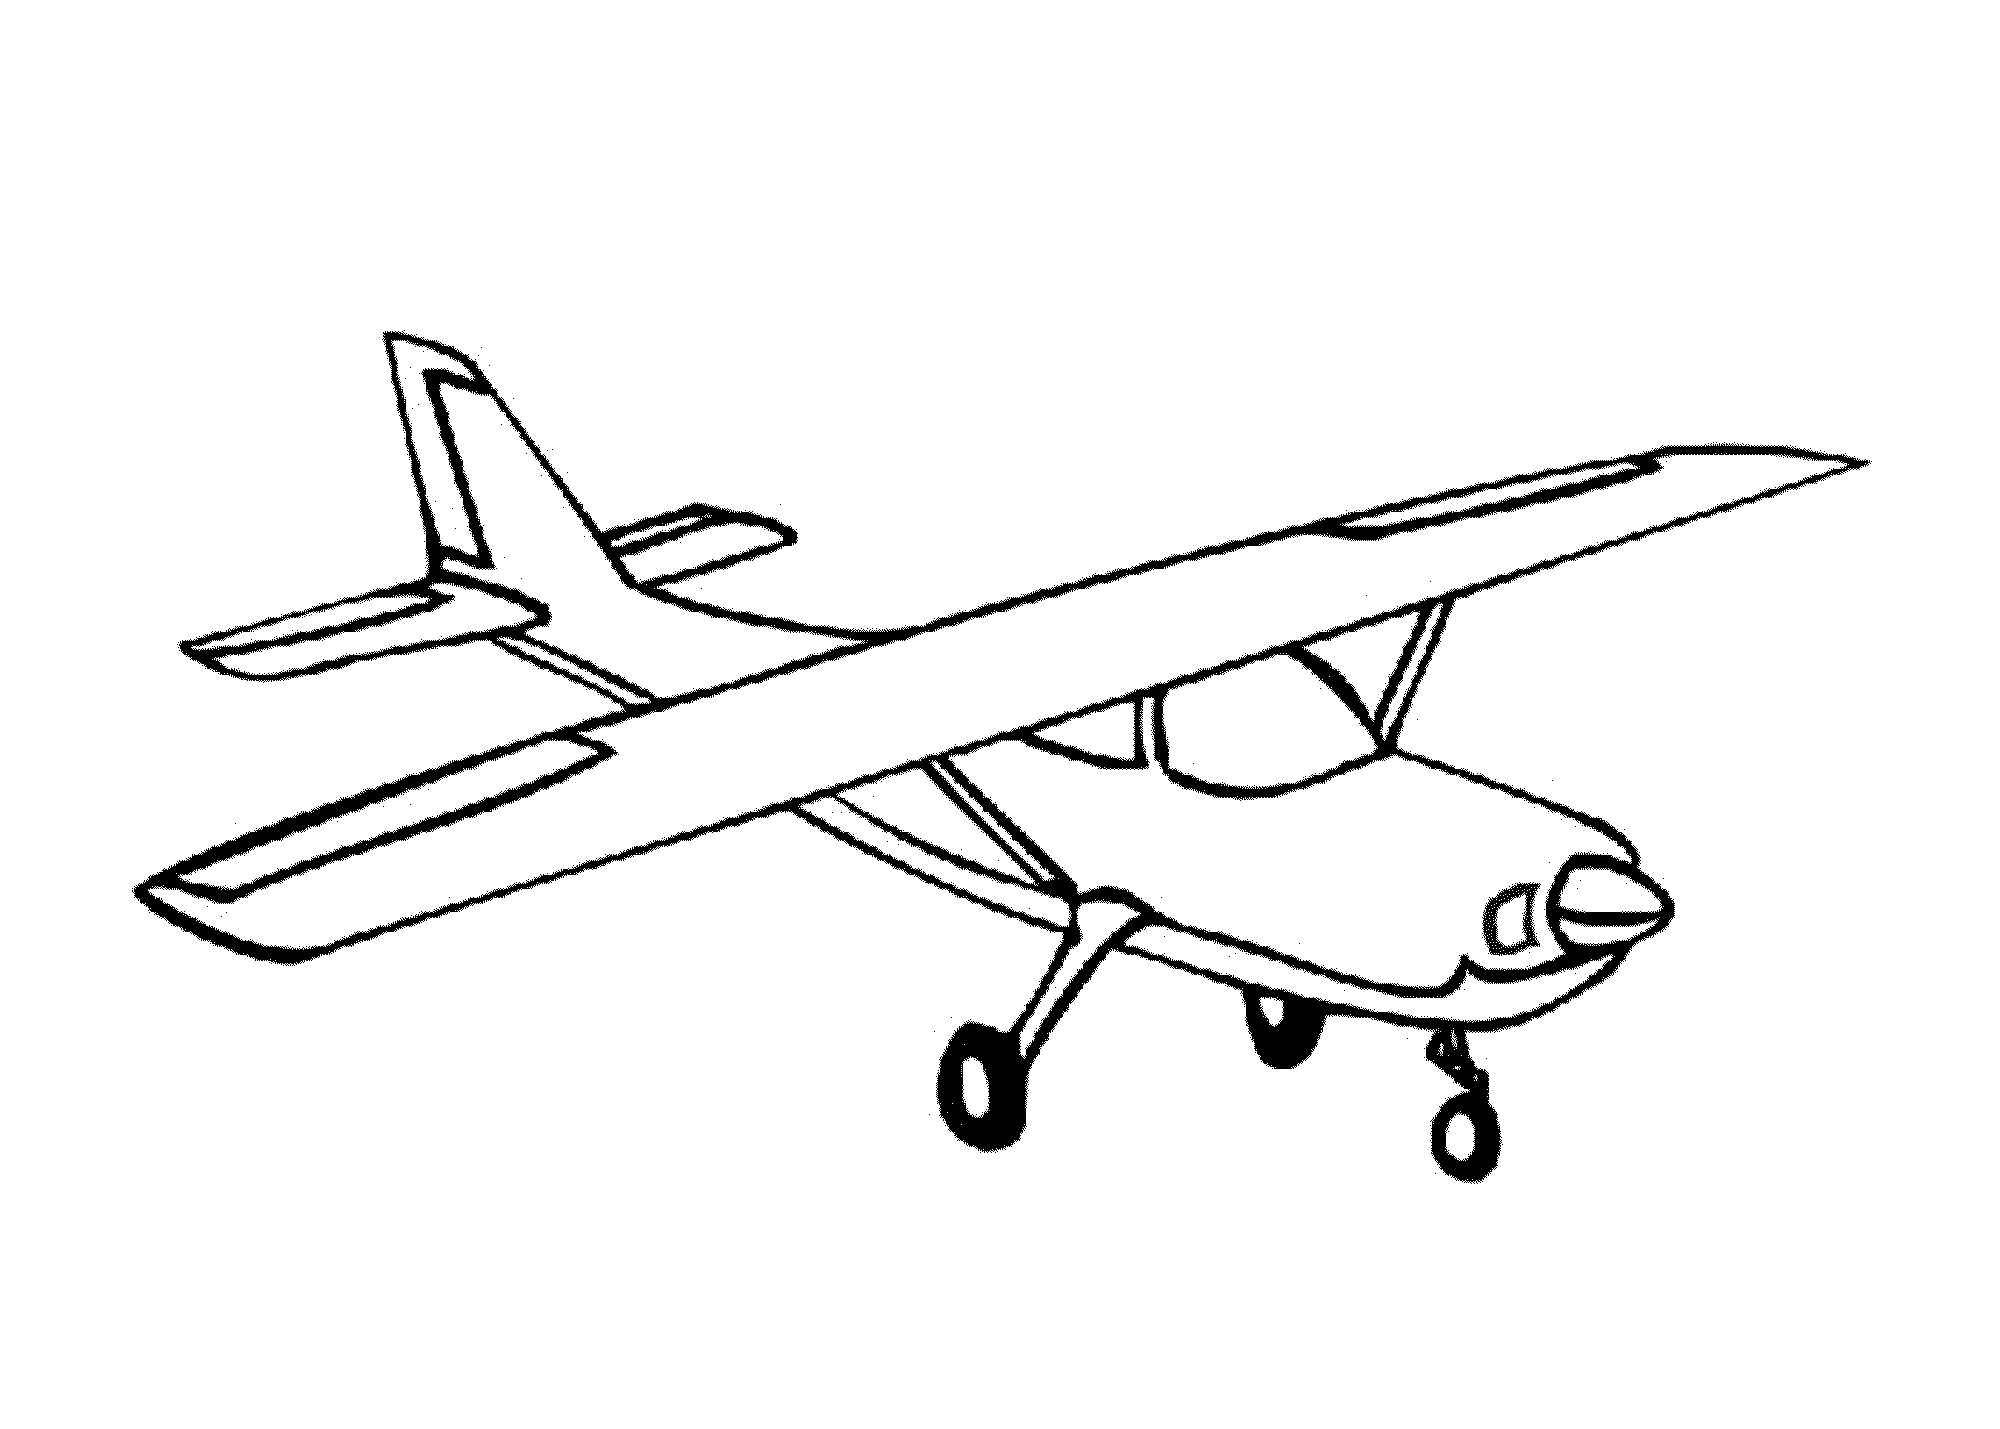 Simple drawing of an airplane simple drawing of an aurora - australianvsa